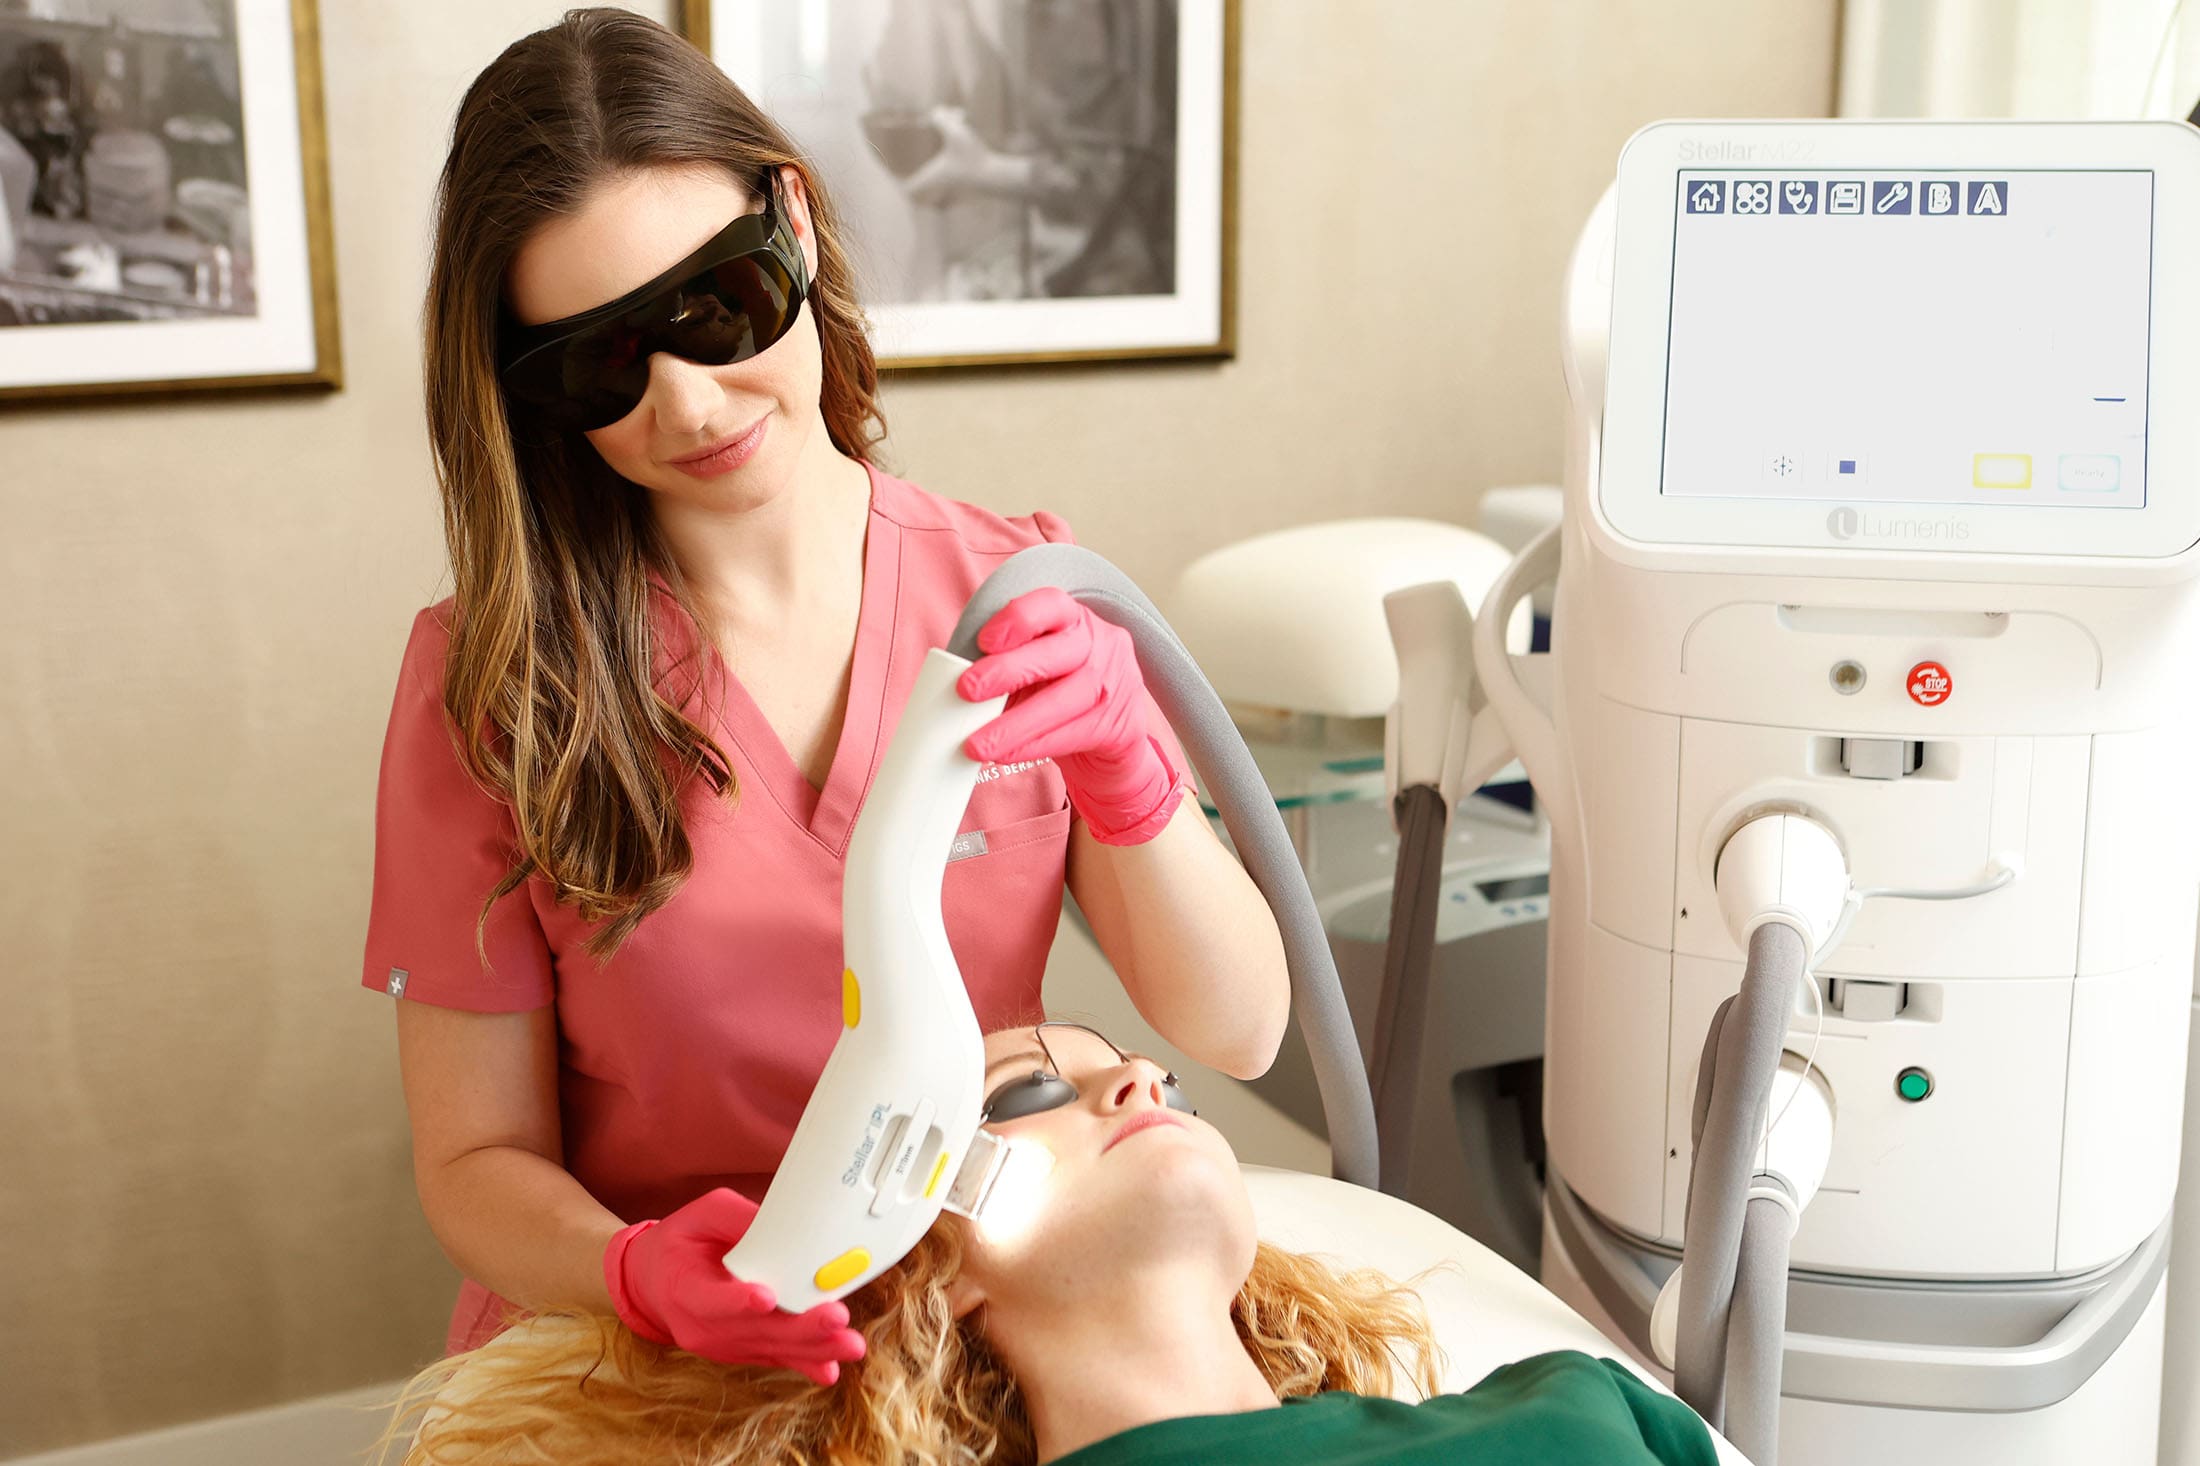 Lindsey smiling and wearing protective glasses while performing a laser IPL photofractional treatment on a patient